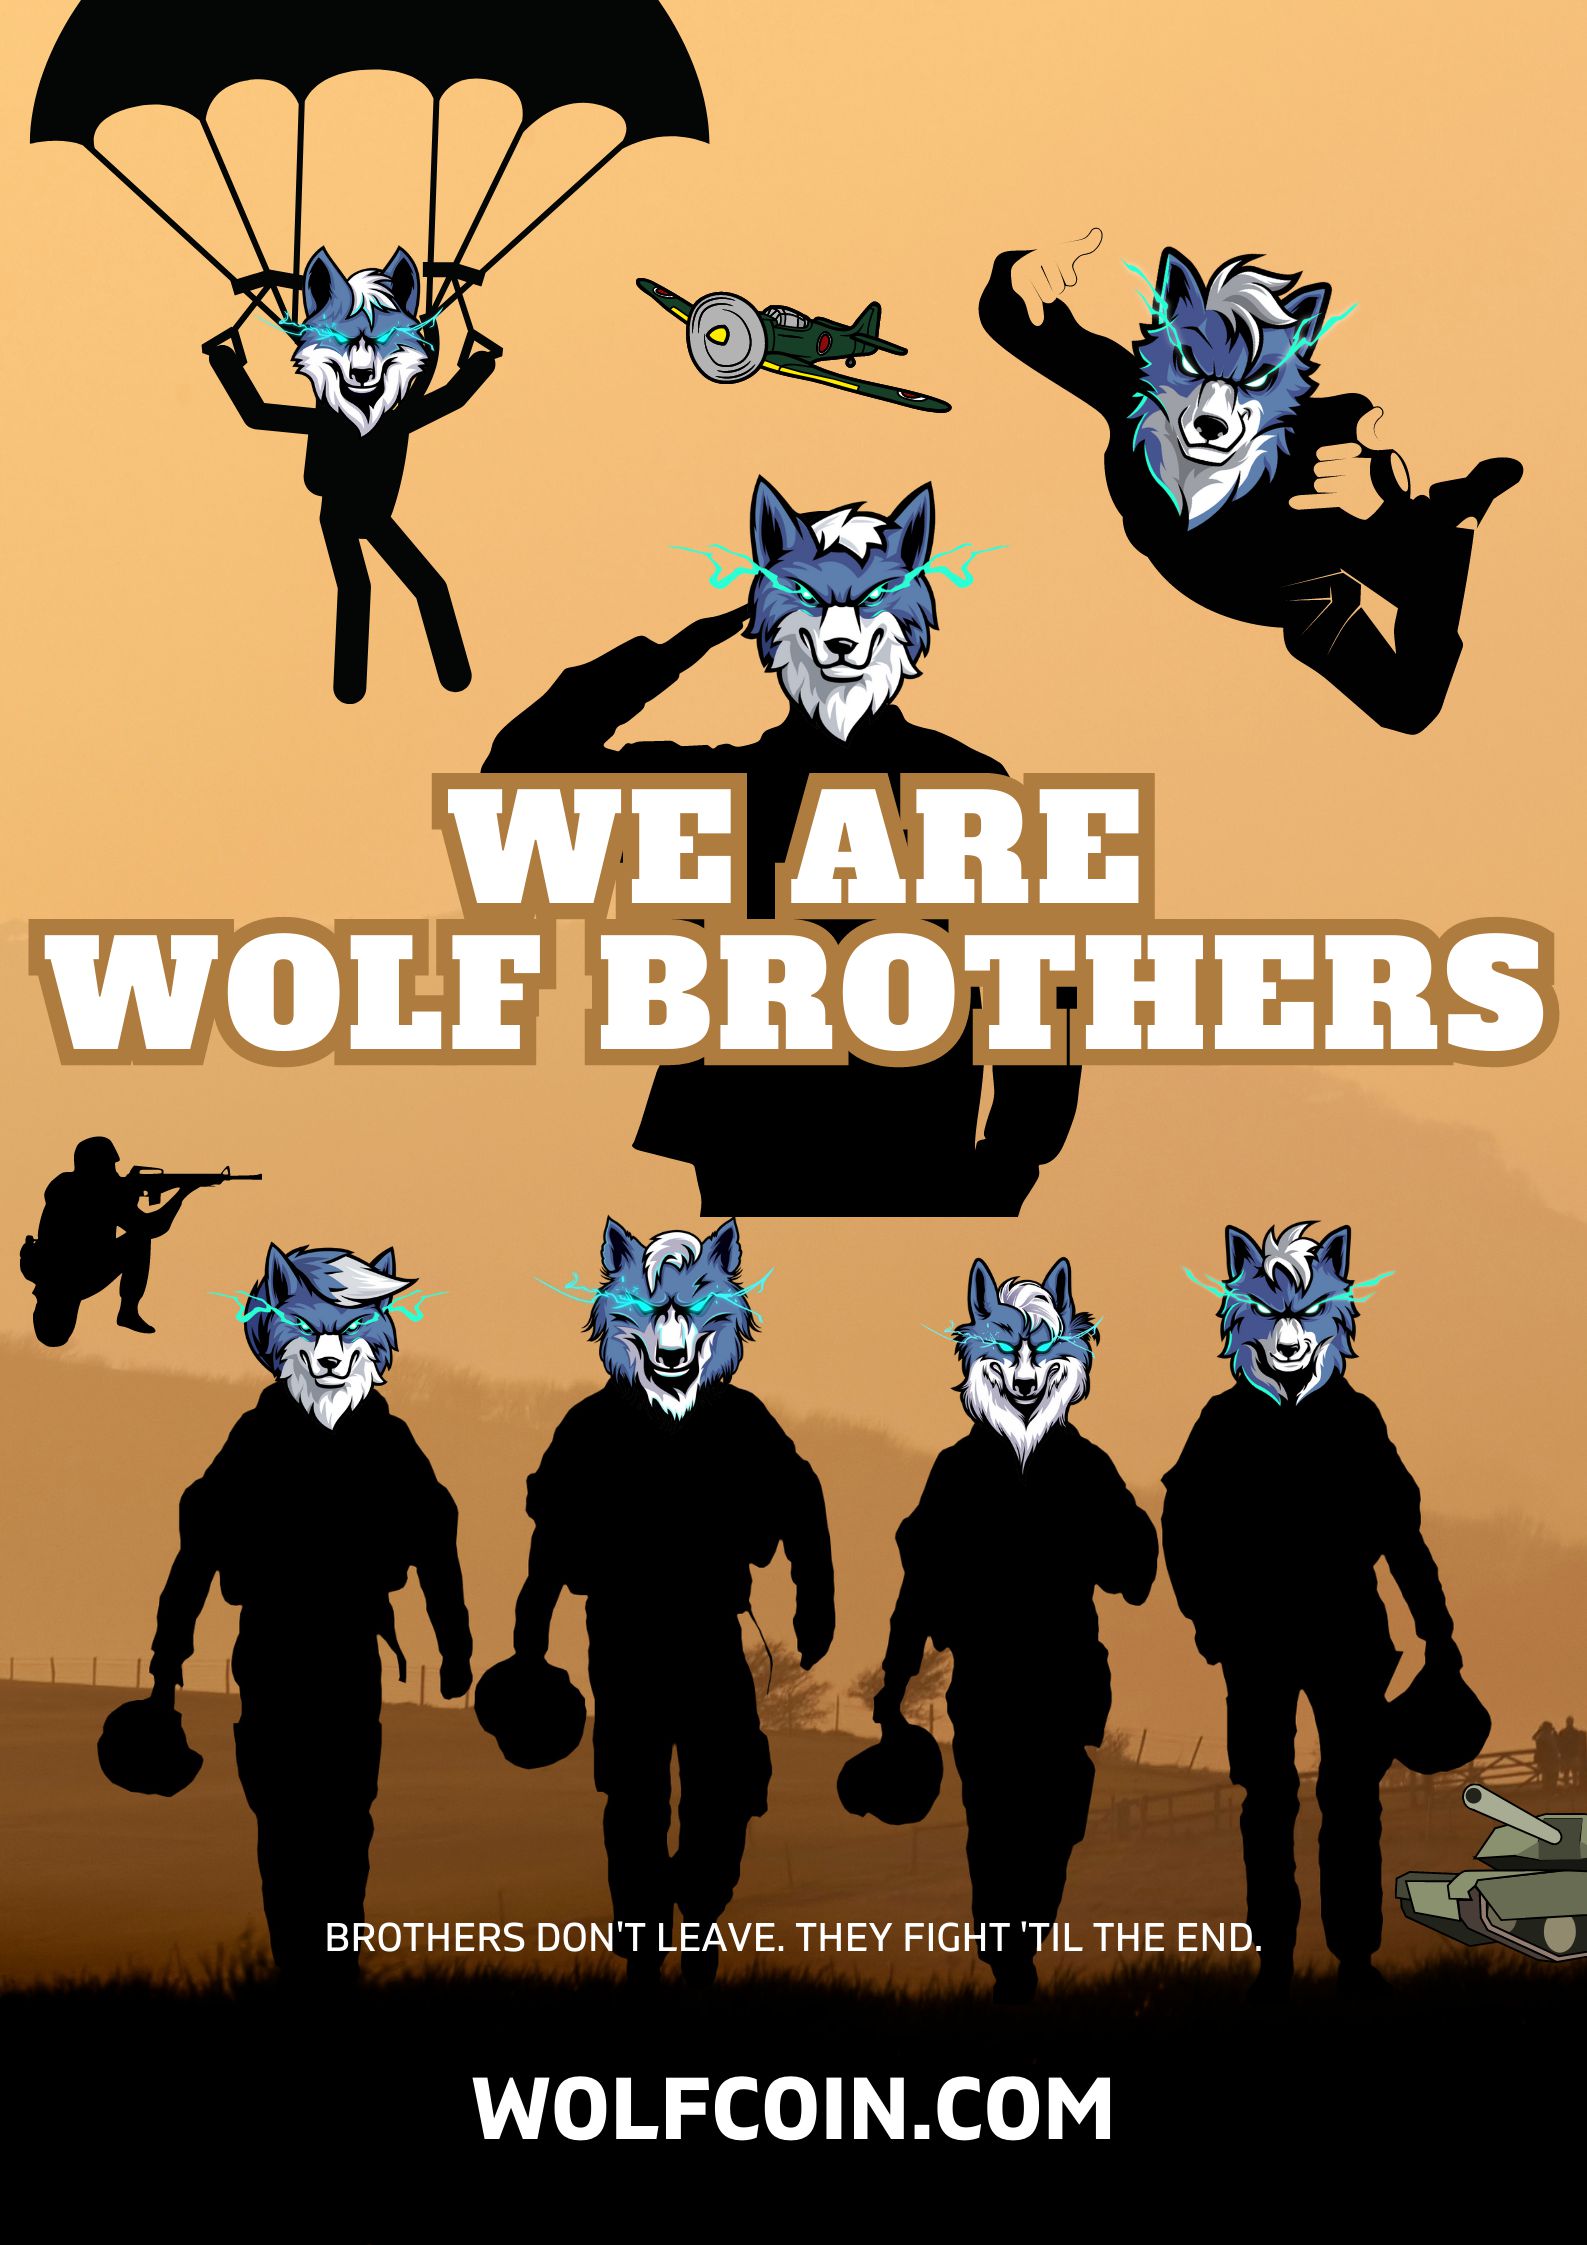 WE ARE WOLFBROTHERS(WOLFCOIN).png.jpg